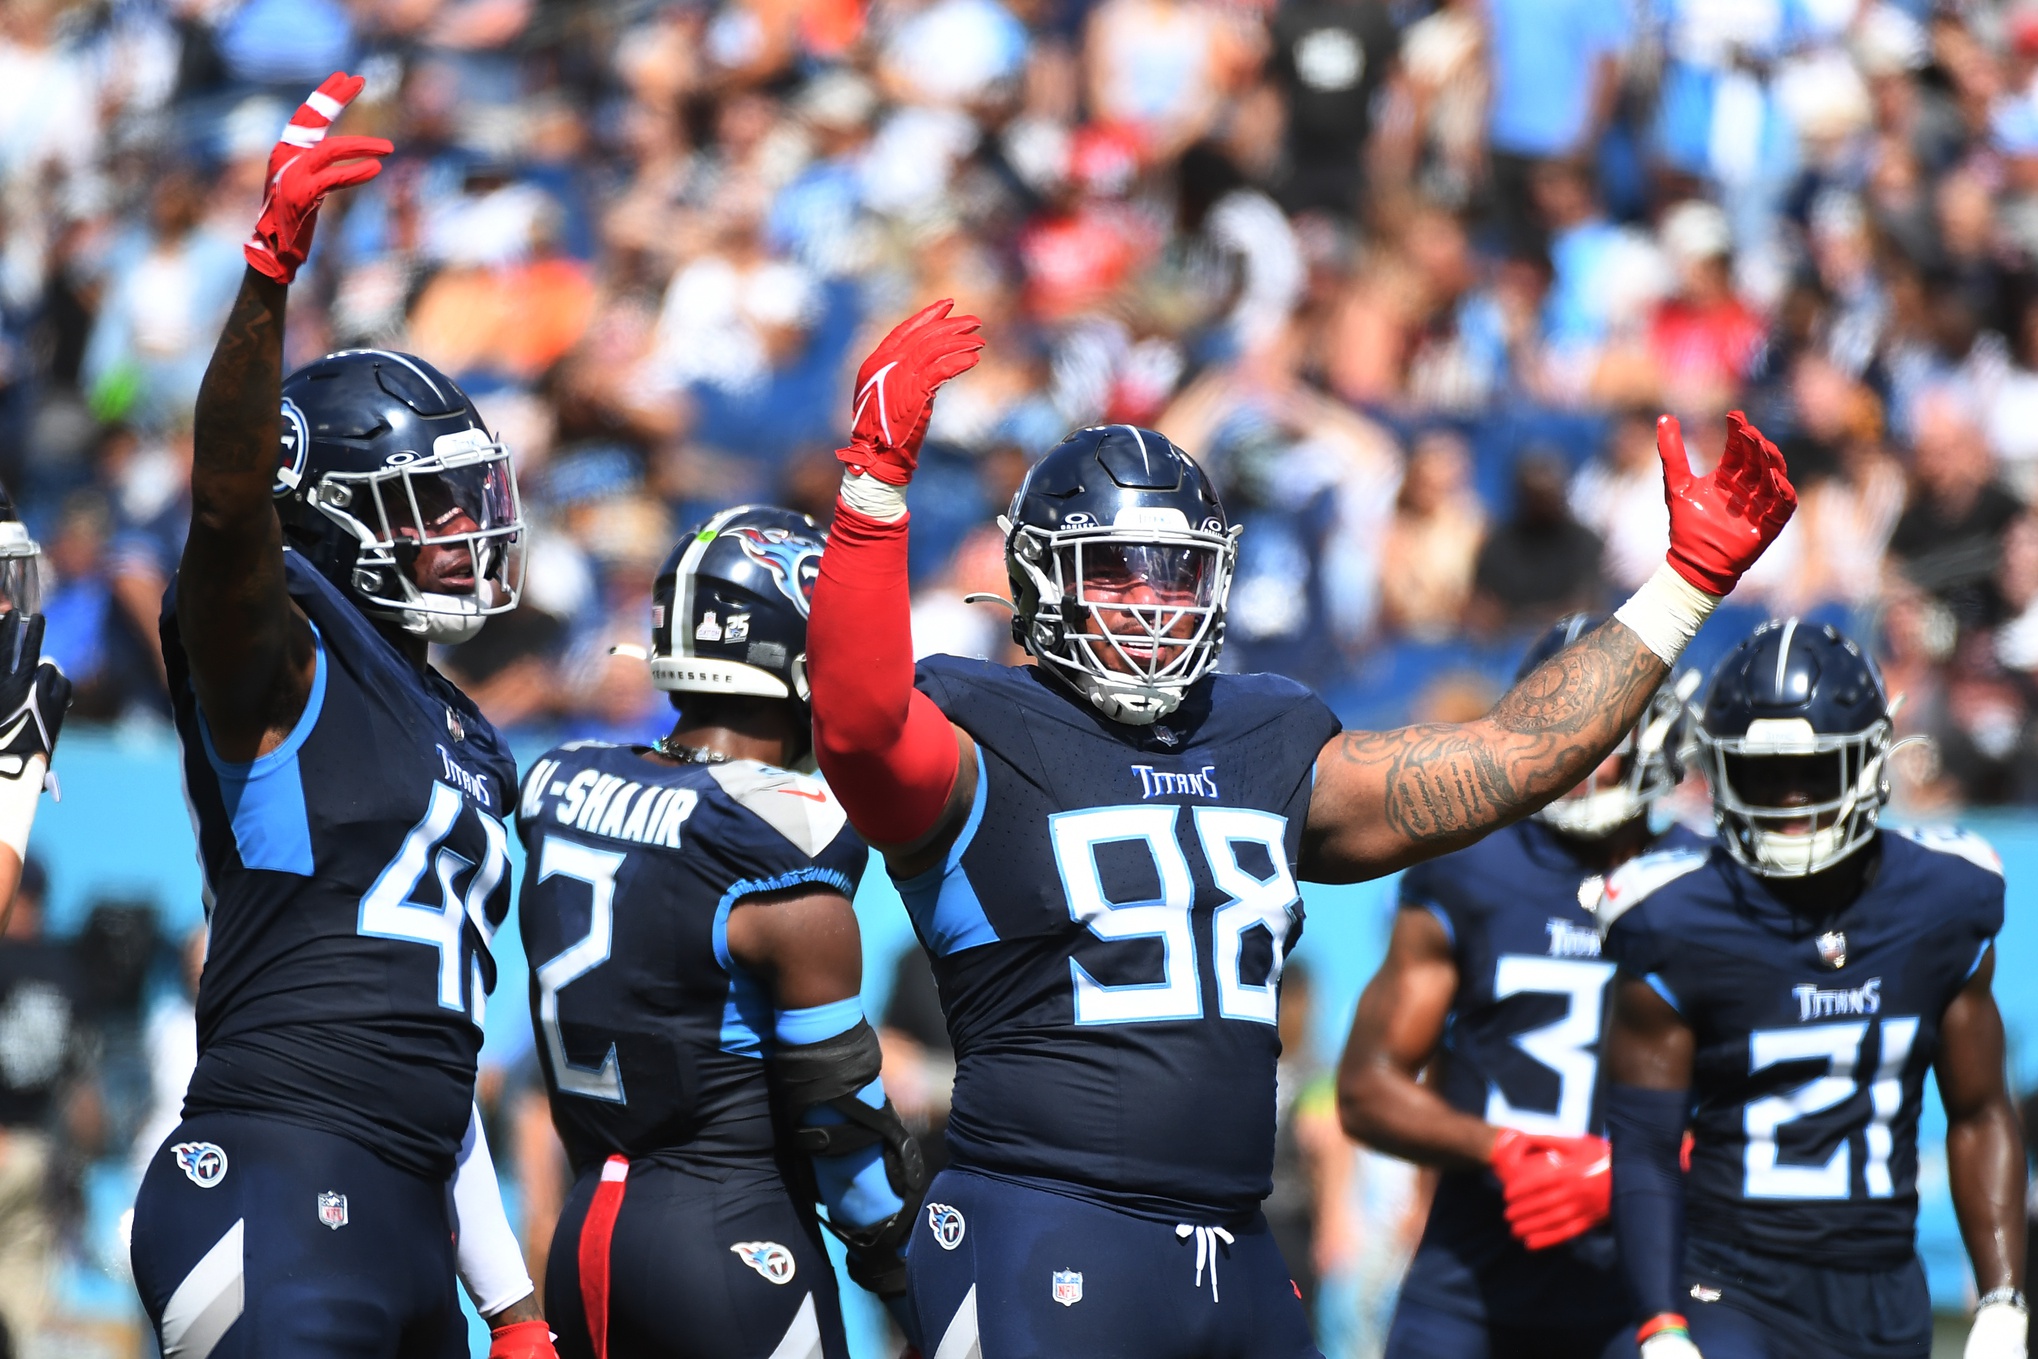 PHOTO GALLERY: Best Pictures From Tennessee Titans' Win Over the